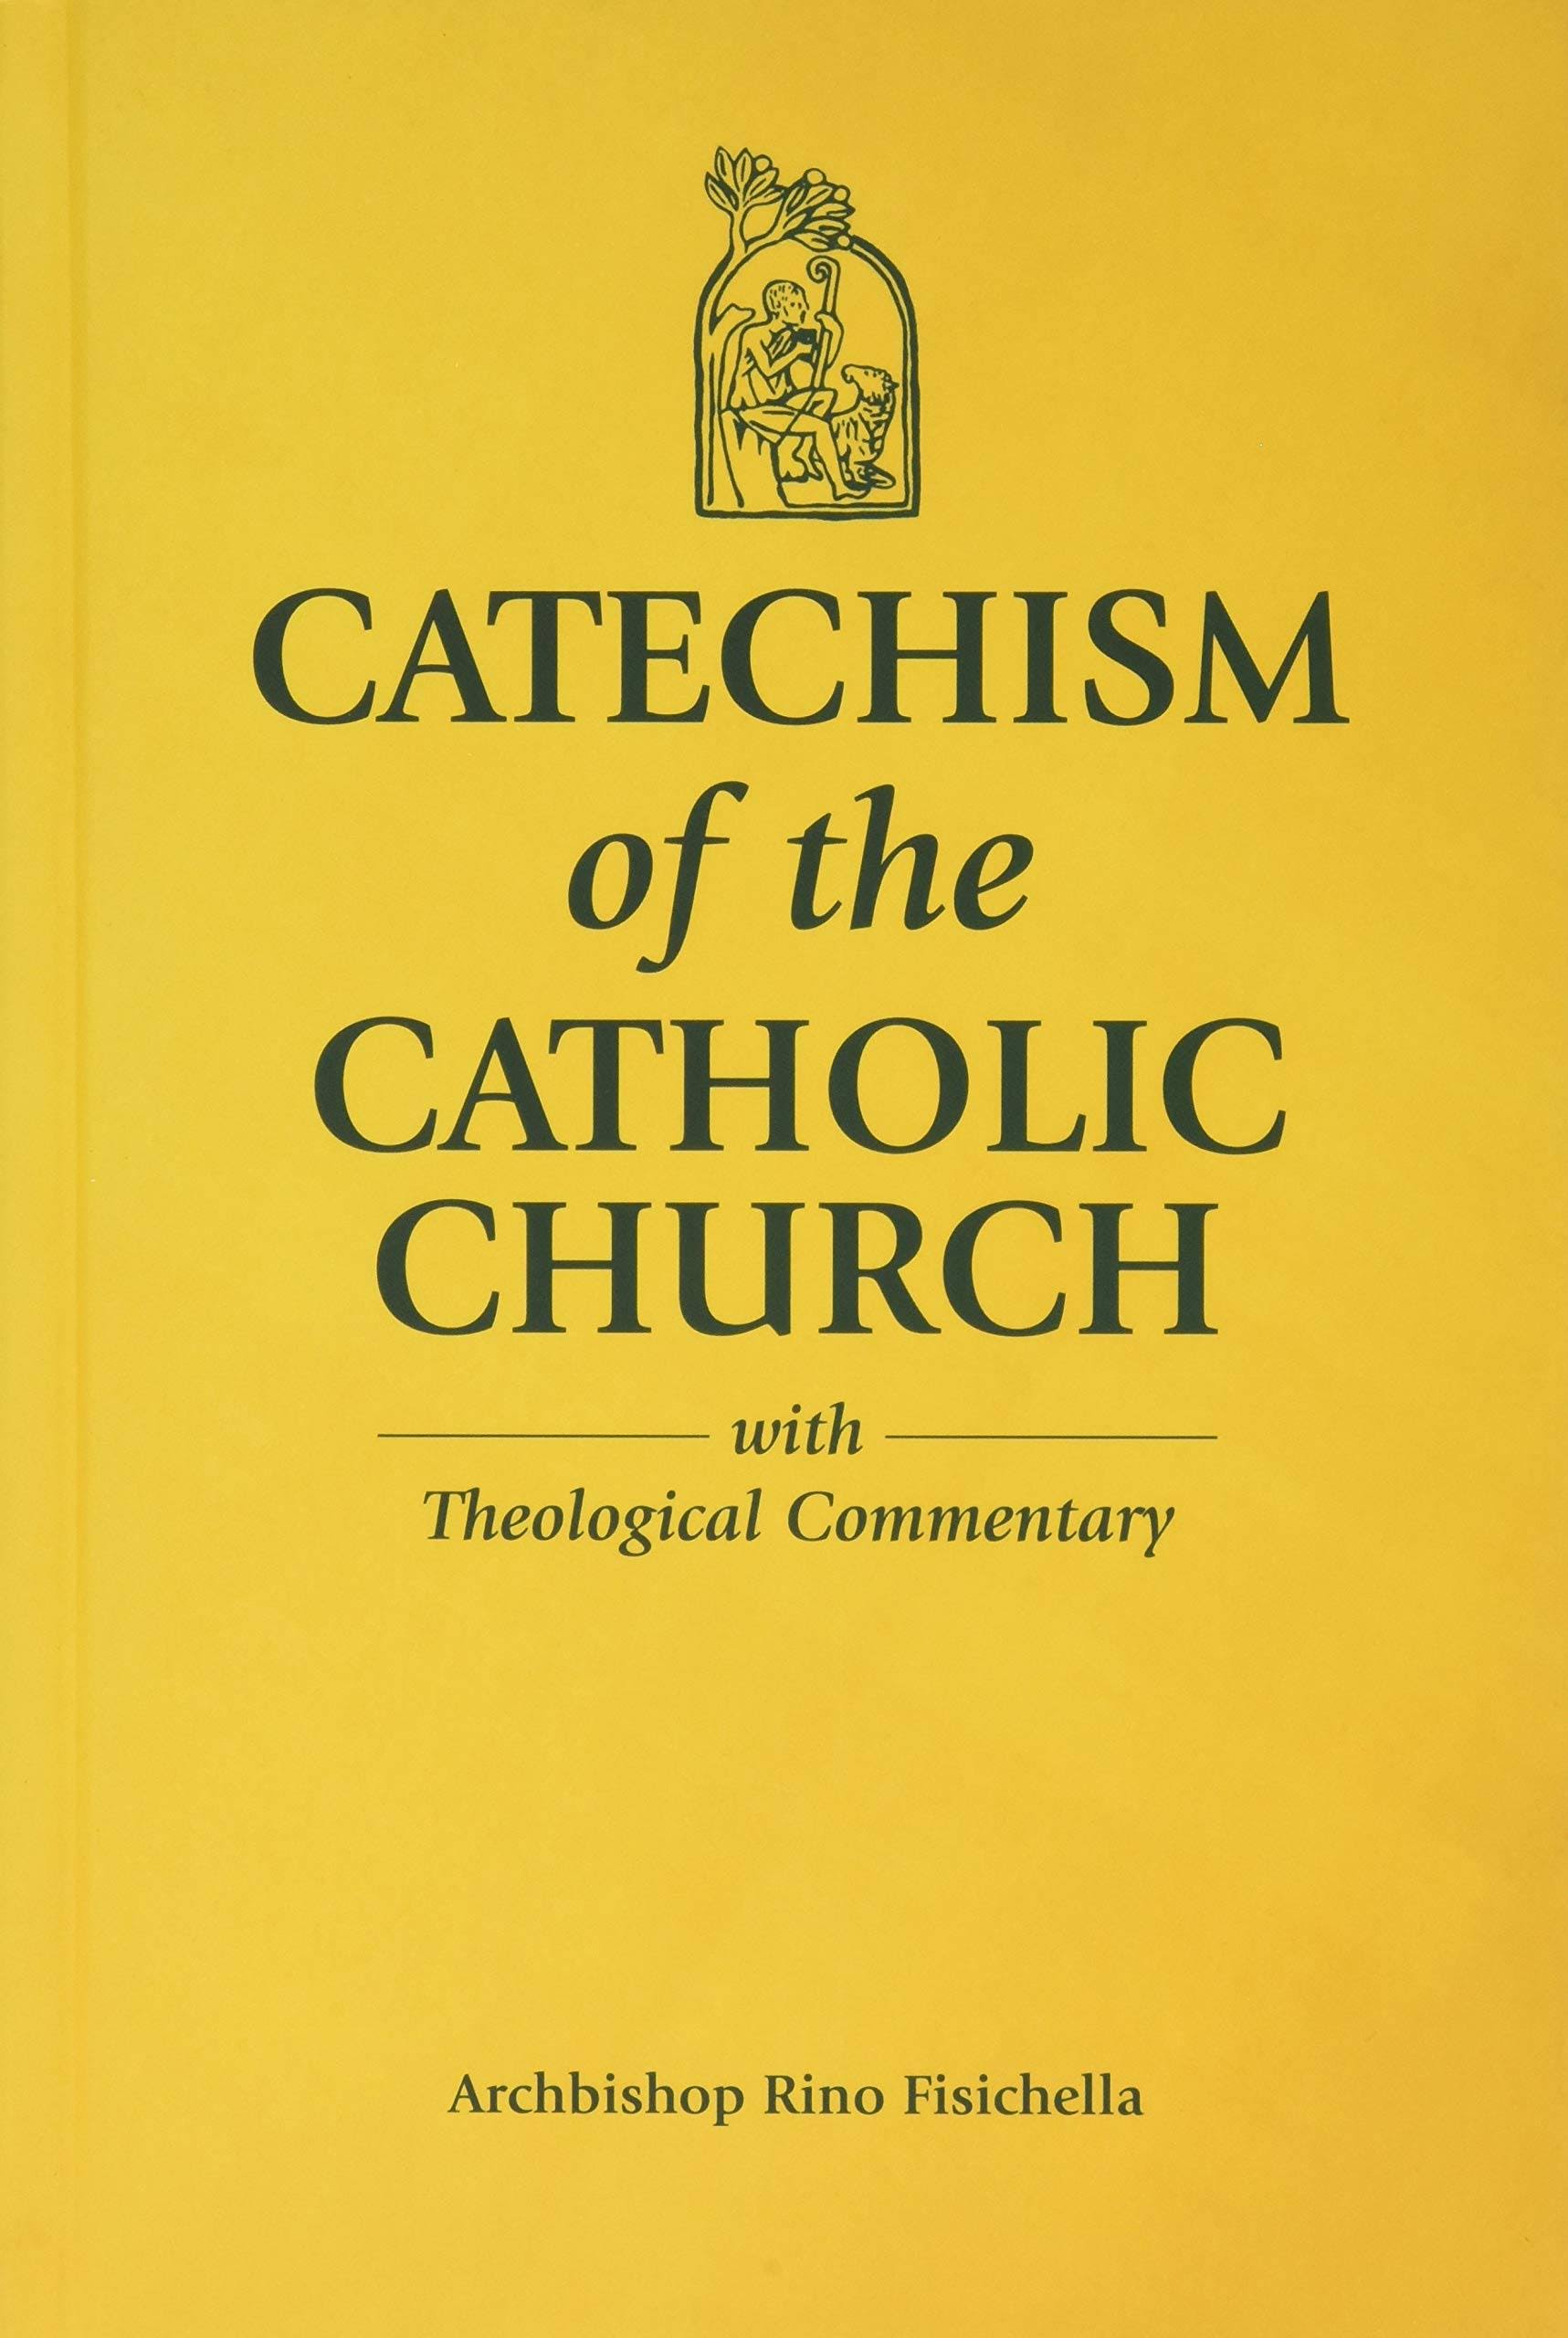 Catechism of The Catholic Church with Theological Commentary